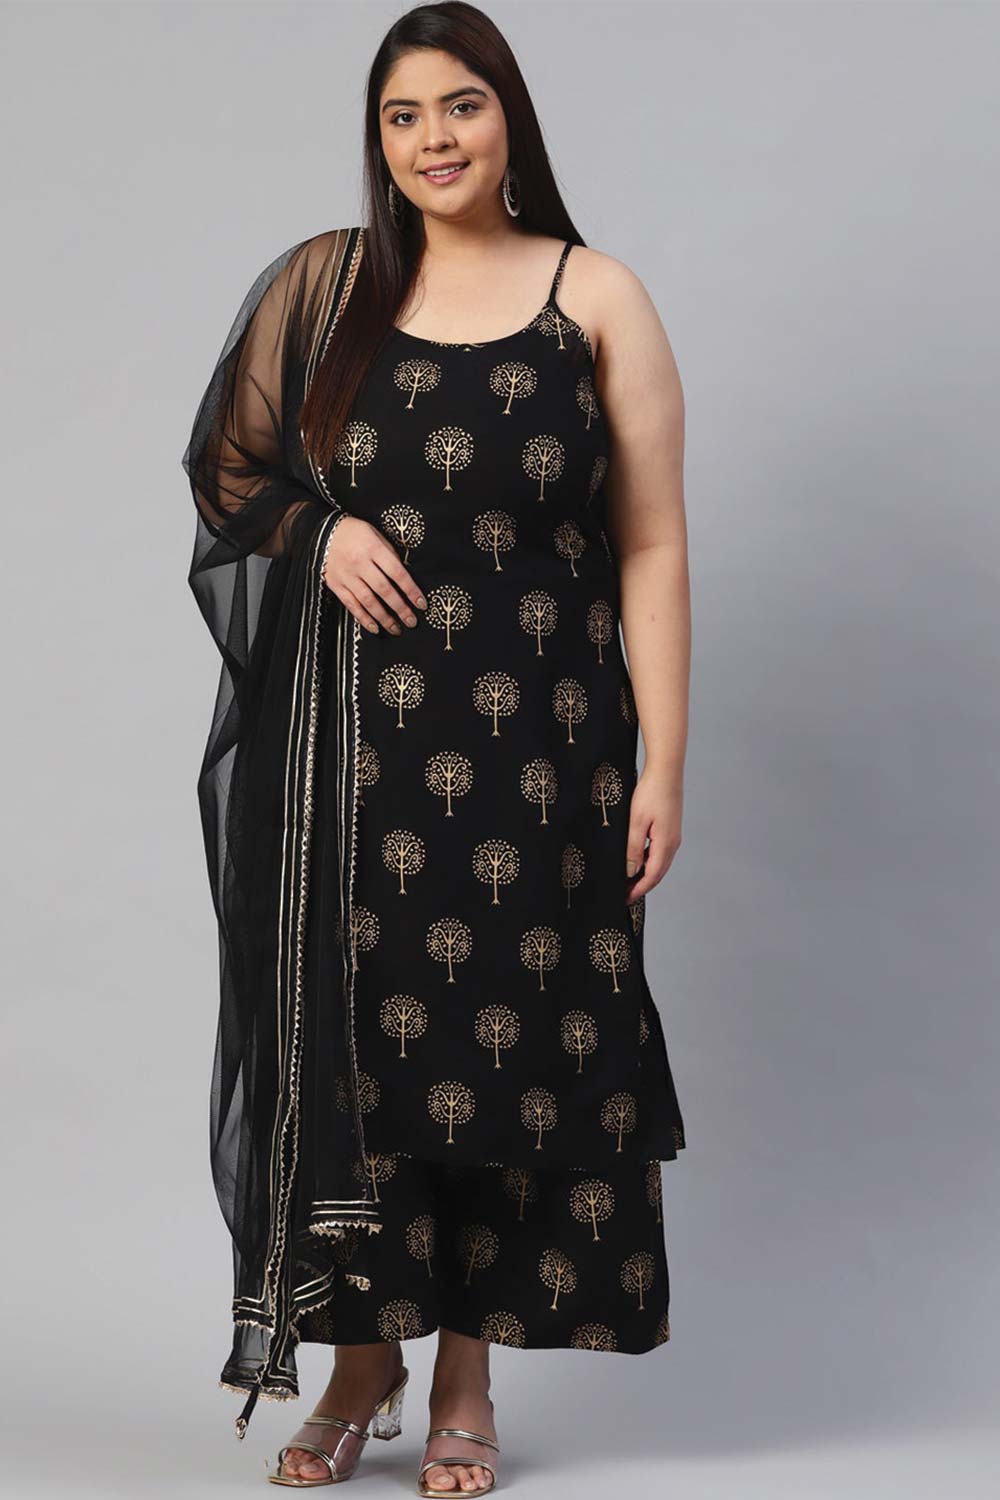 Plus Size Indian Dresses for Women  Plus Size Indian Clothing in USA —  Karmaplace